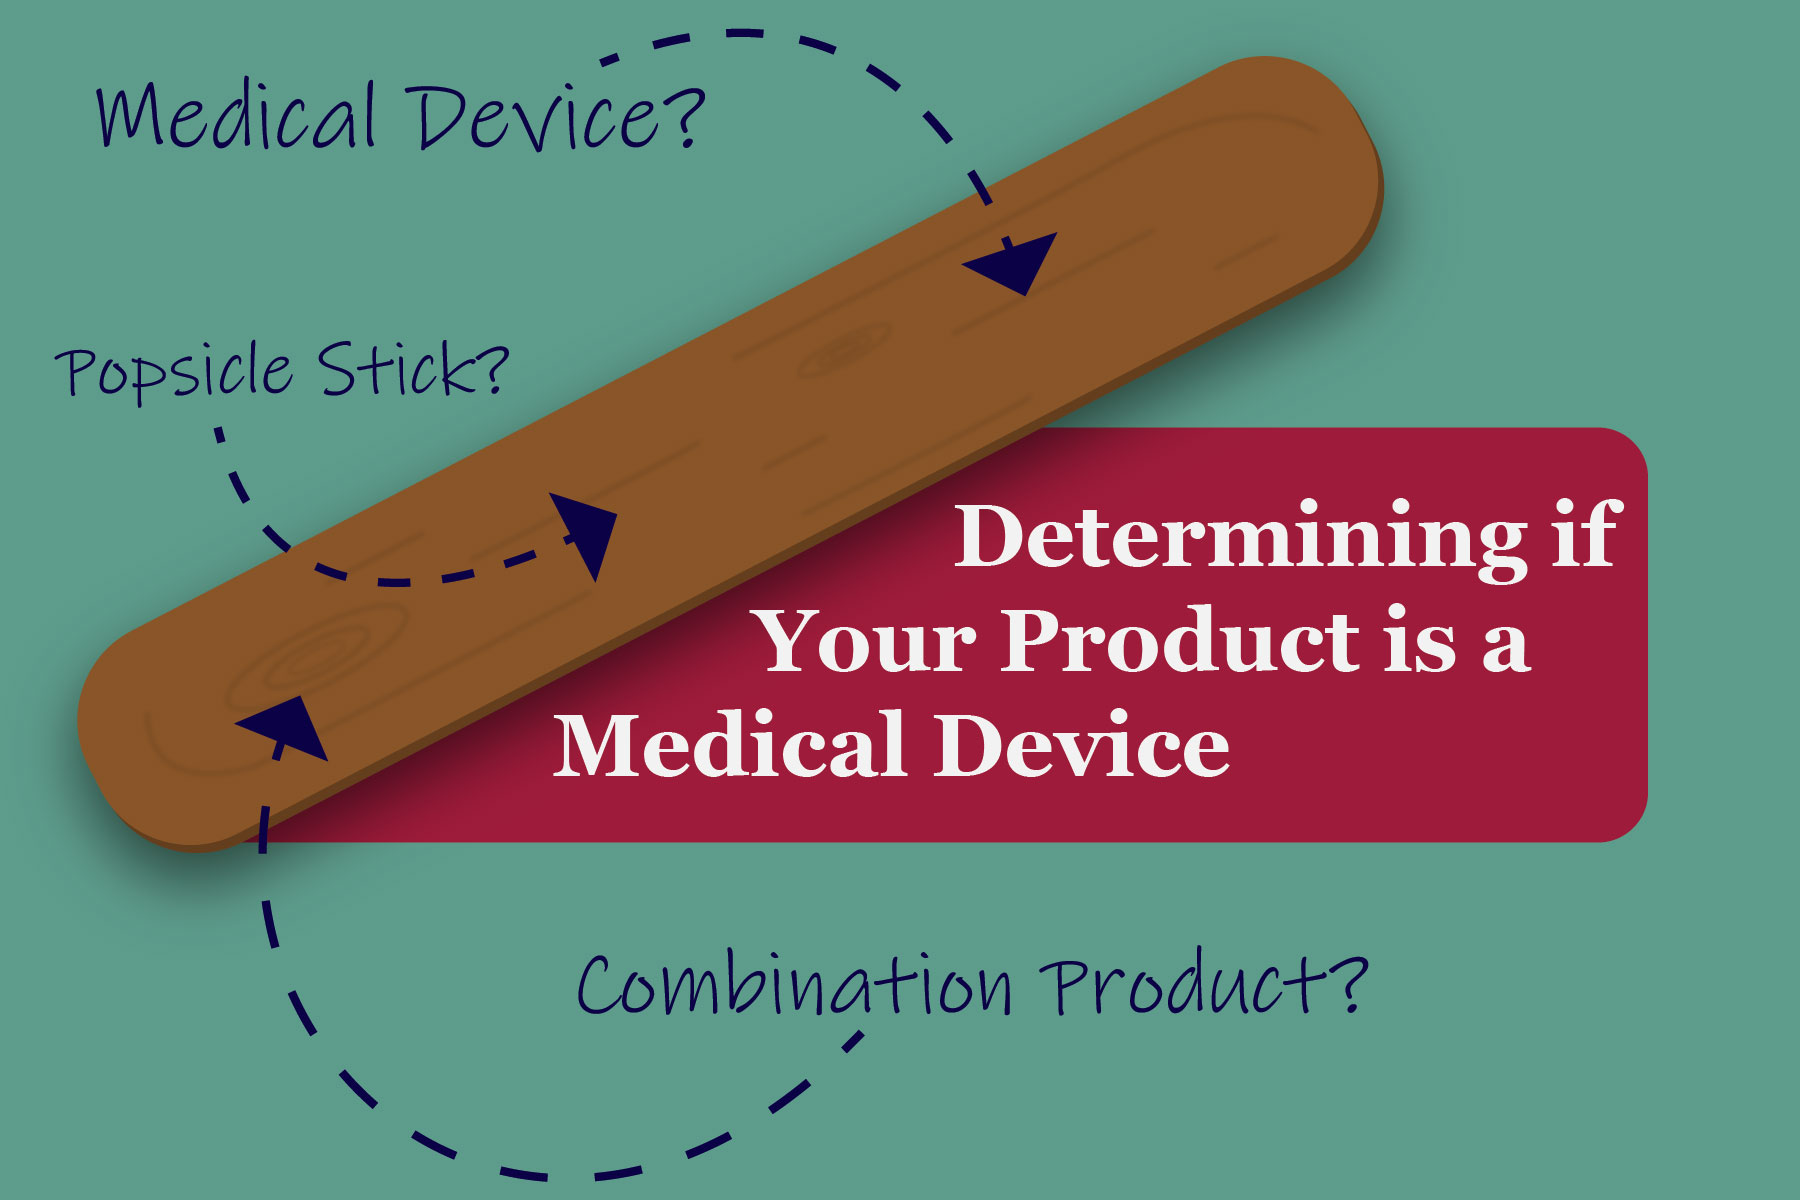 Popsicle stick as a medical device product